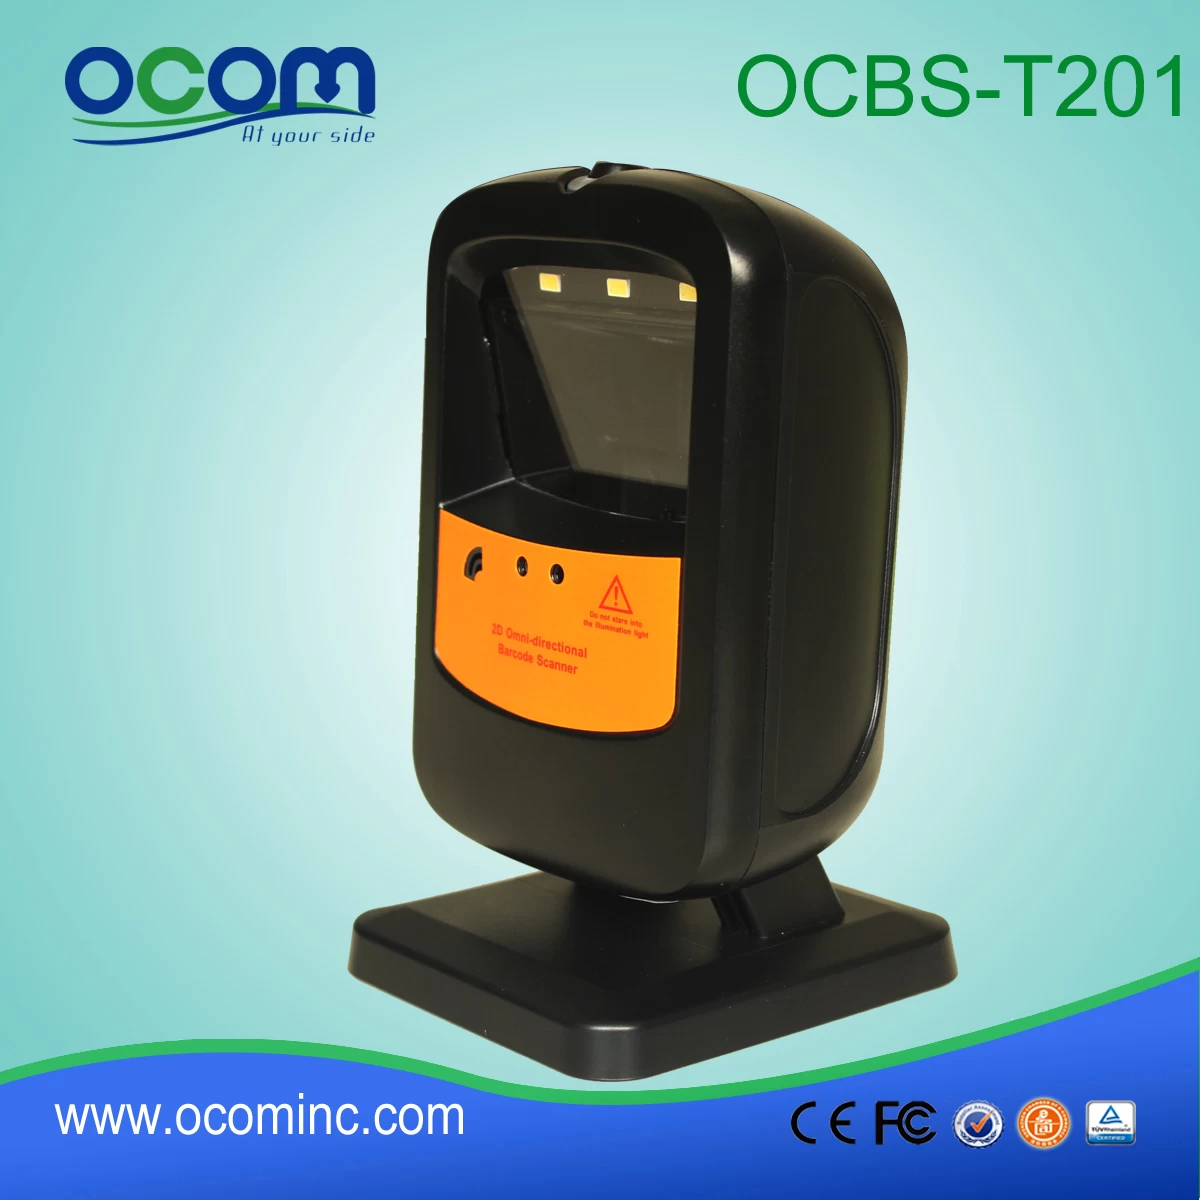 OCBS-T201:long distance barcode scanner mini usb, barcode reader price